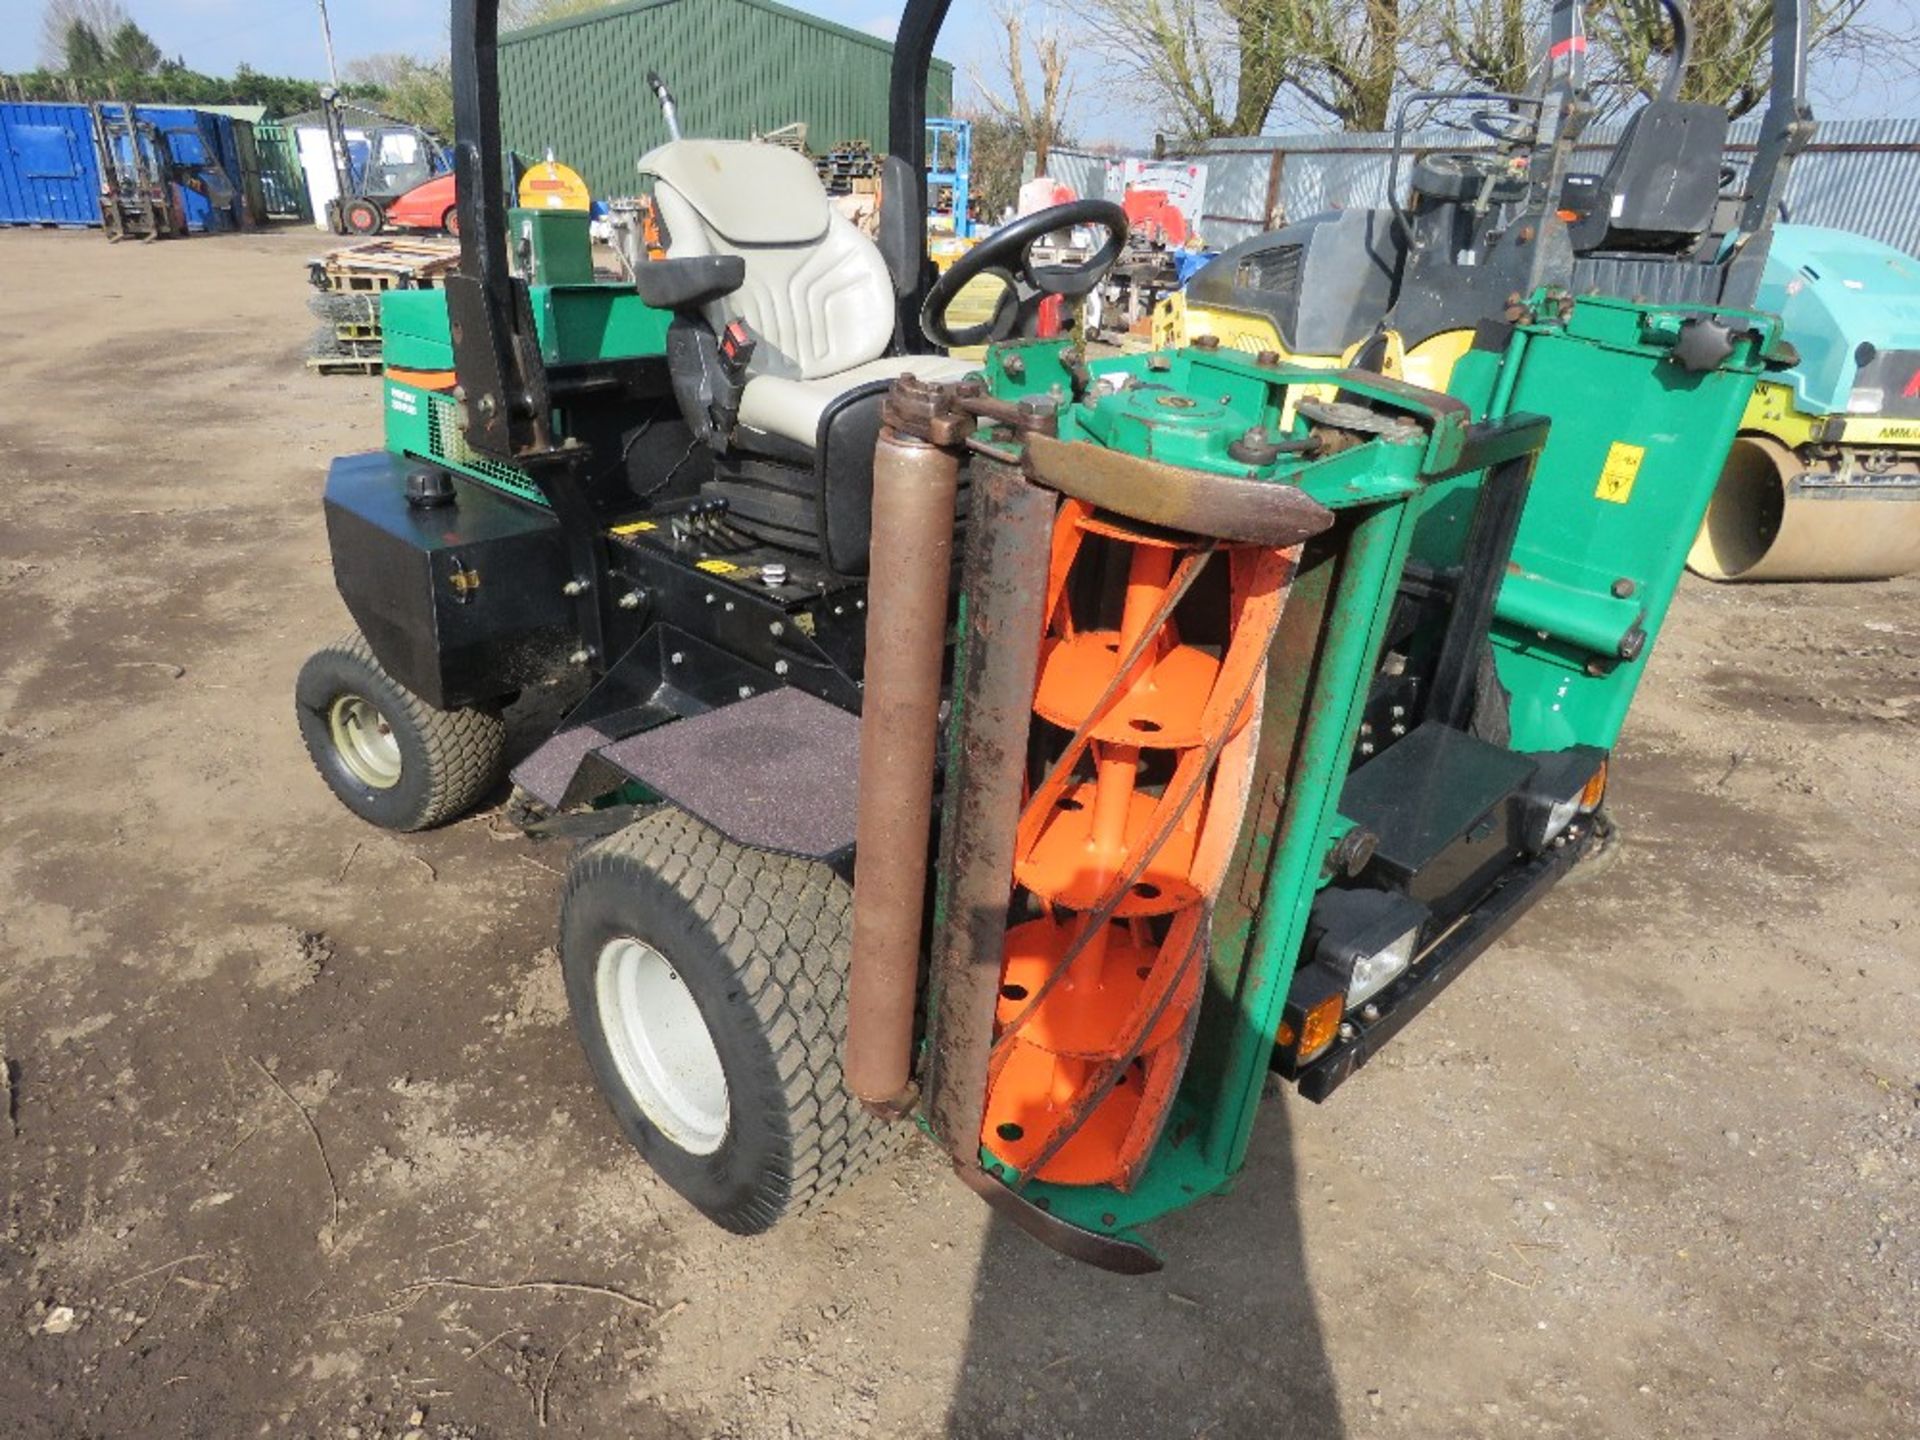 RANSOMES PARKWAY 2250 PLUS PROFESSIONAL TRIPLE RIDE ON MOWER, 4WD, 3300 REC HOURS. DIRECT FROM GOLF